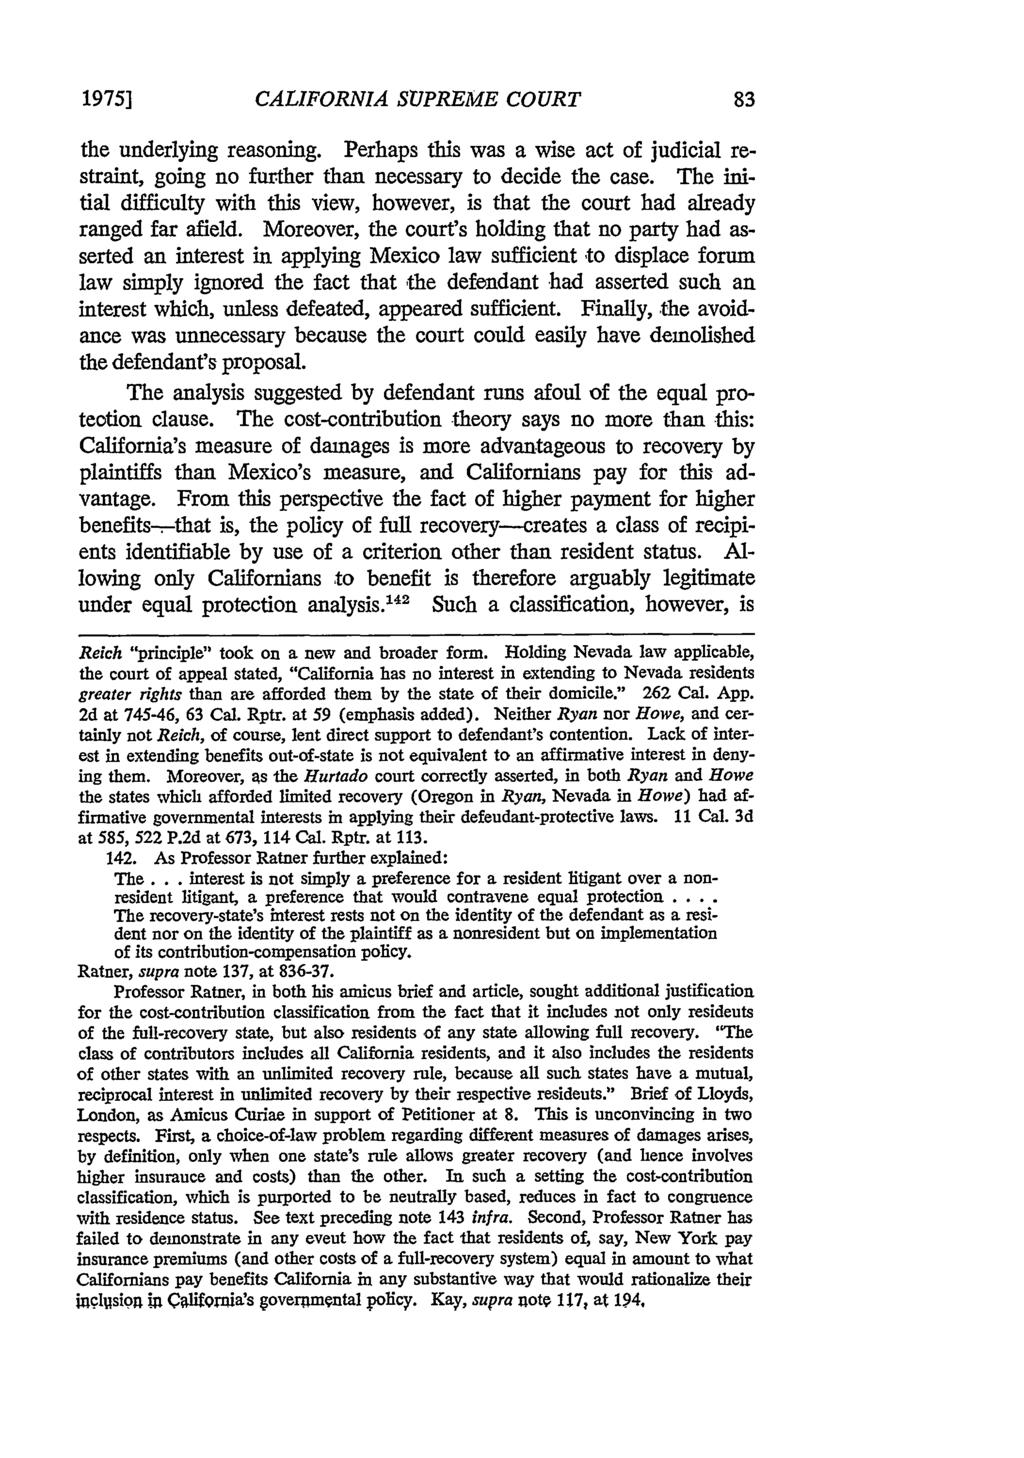 1975] CALIFORNIA SUPREME COURT the underlying reasoning. Perhaps this was a wise act of judicial restraint, going no further than necessary to decide the case.